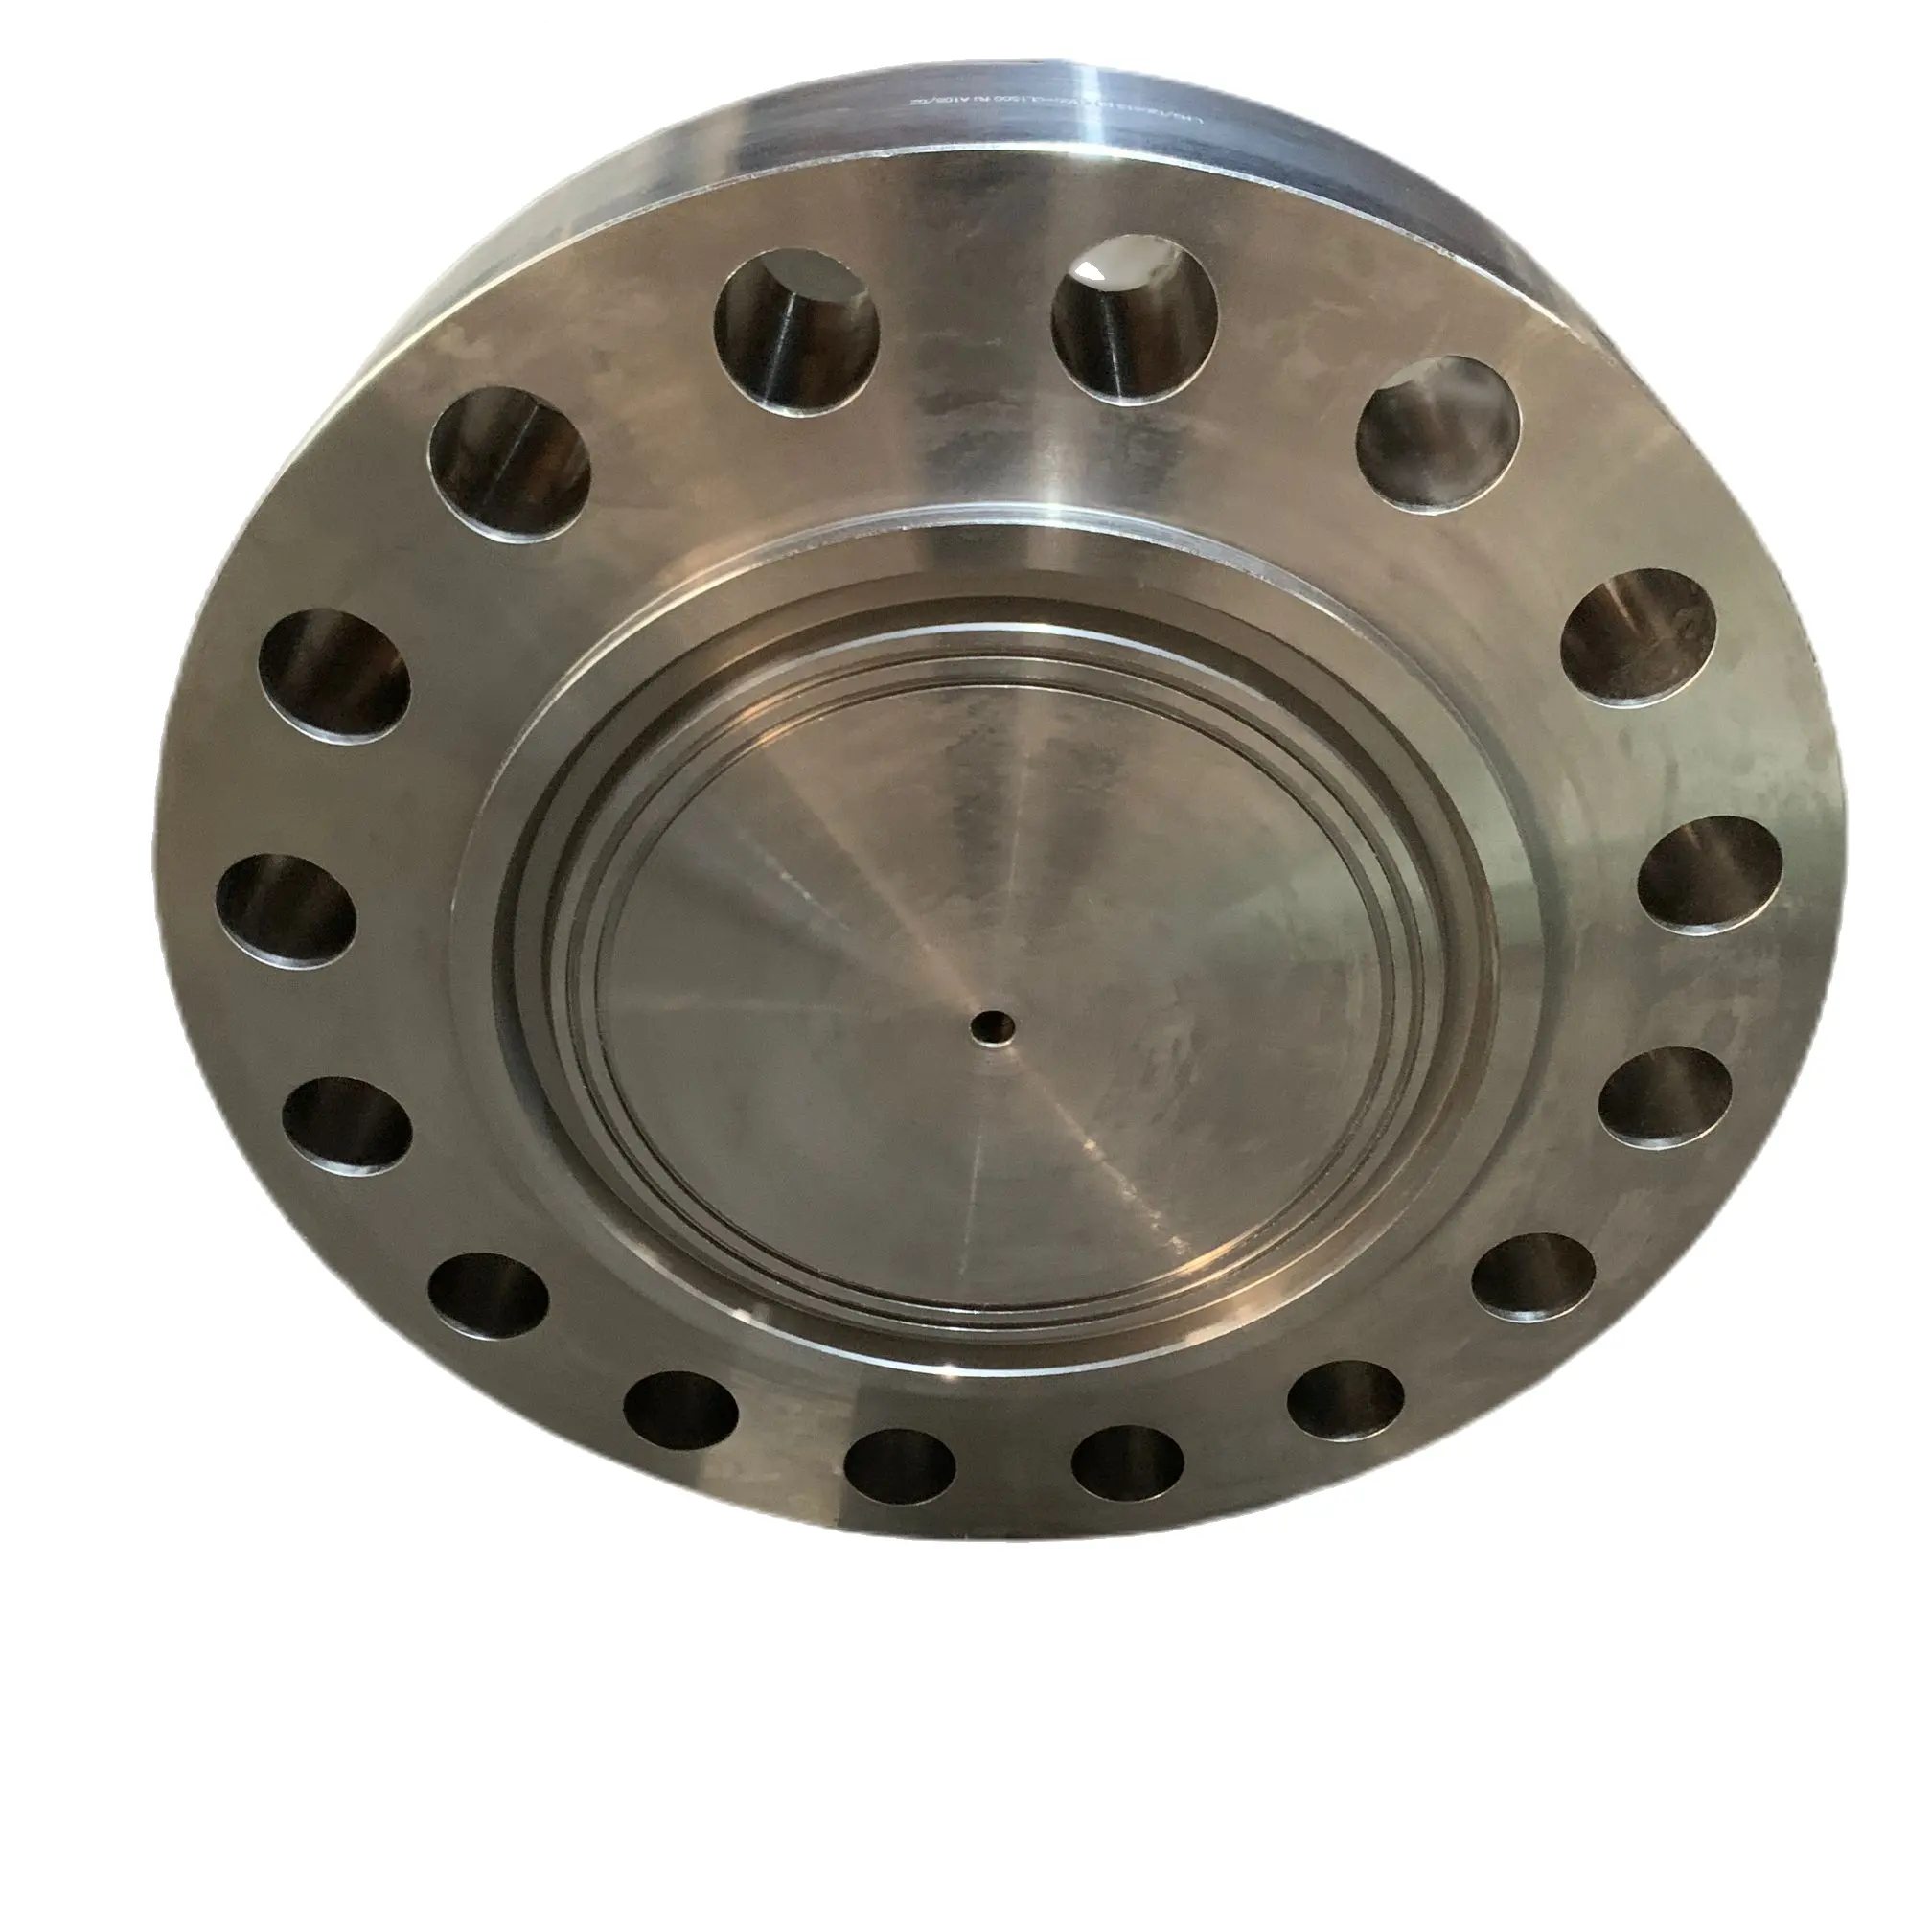 ASTM a350 lf2 steel flange npt thread blind carbon steel and stainless steel flange a350 lf2